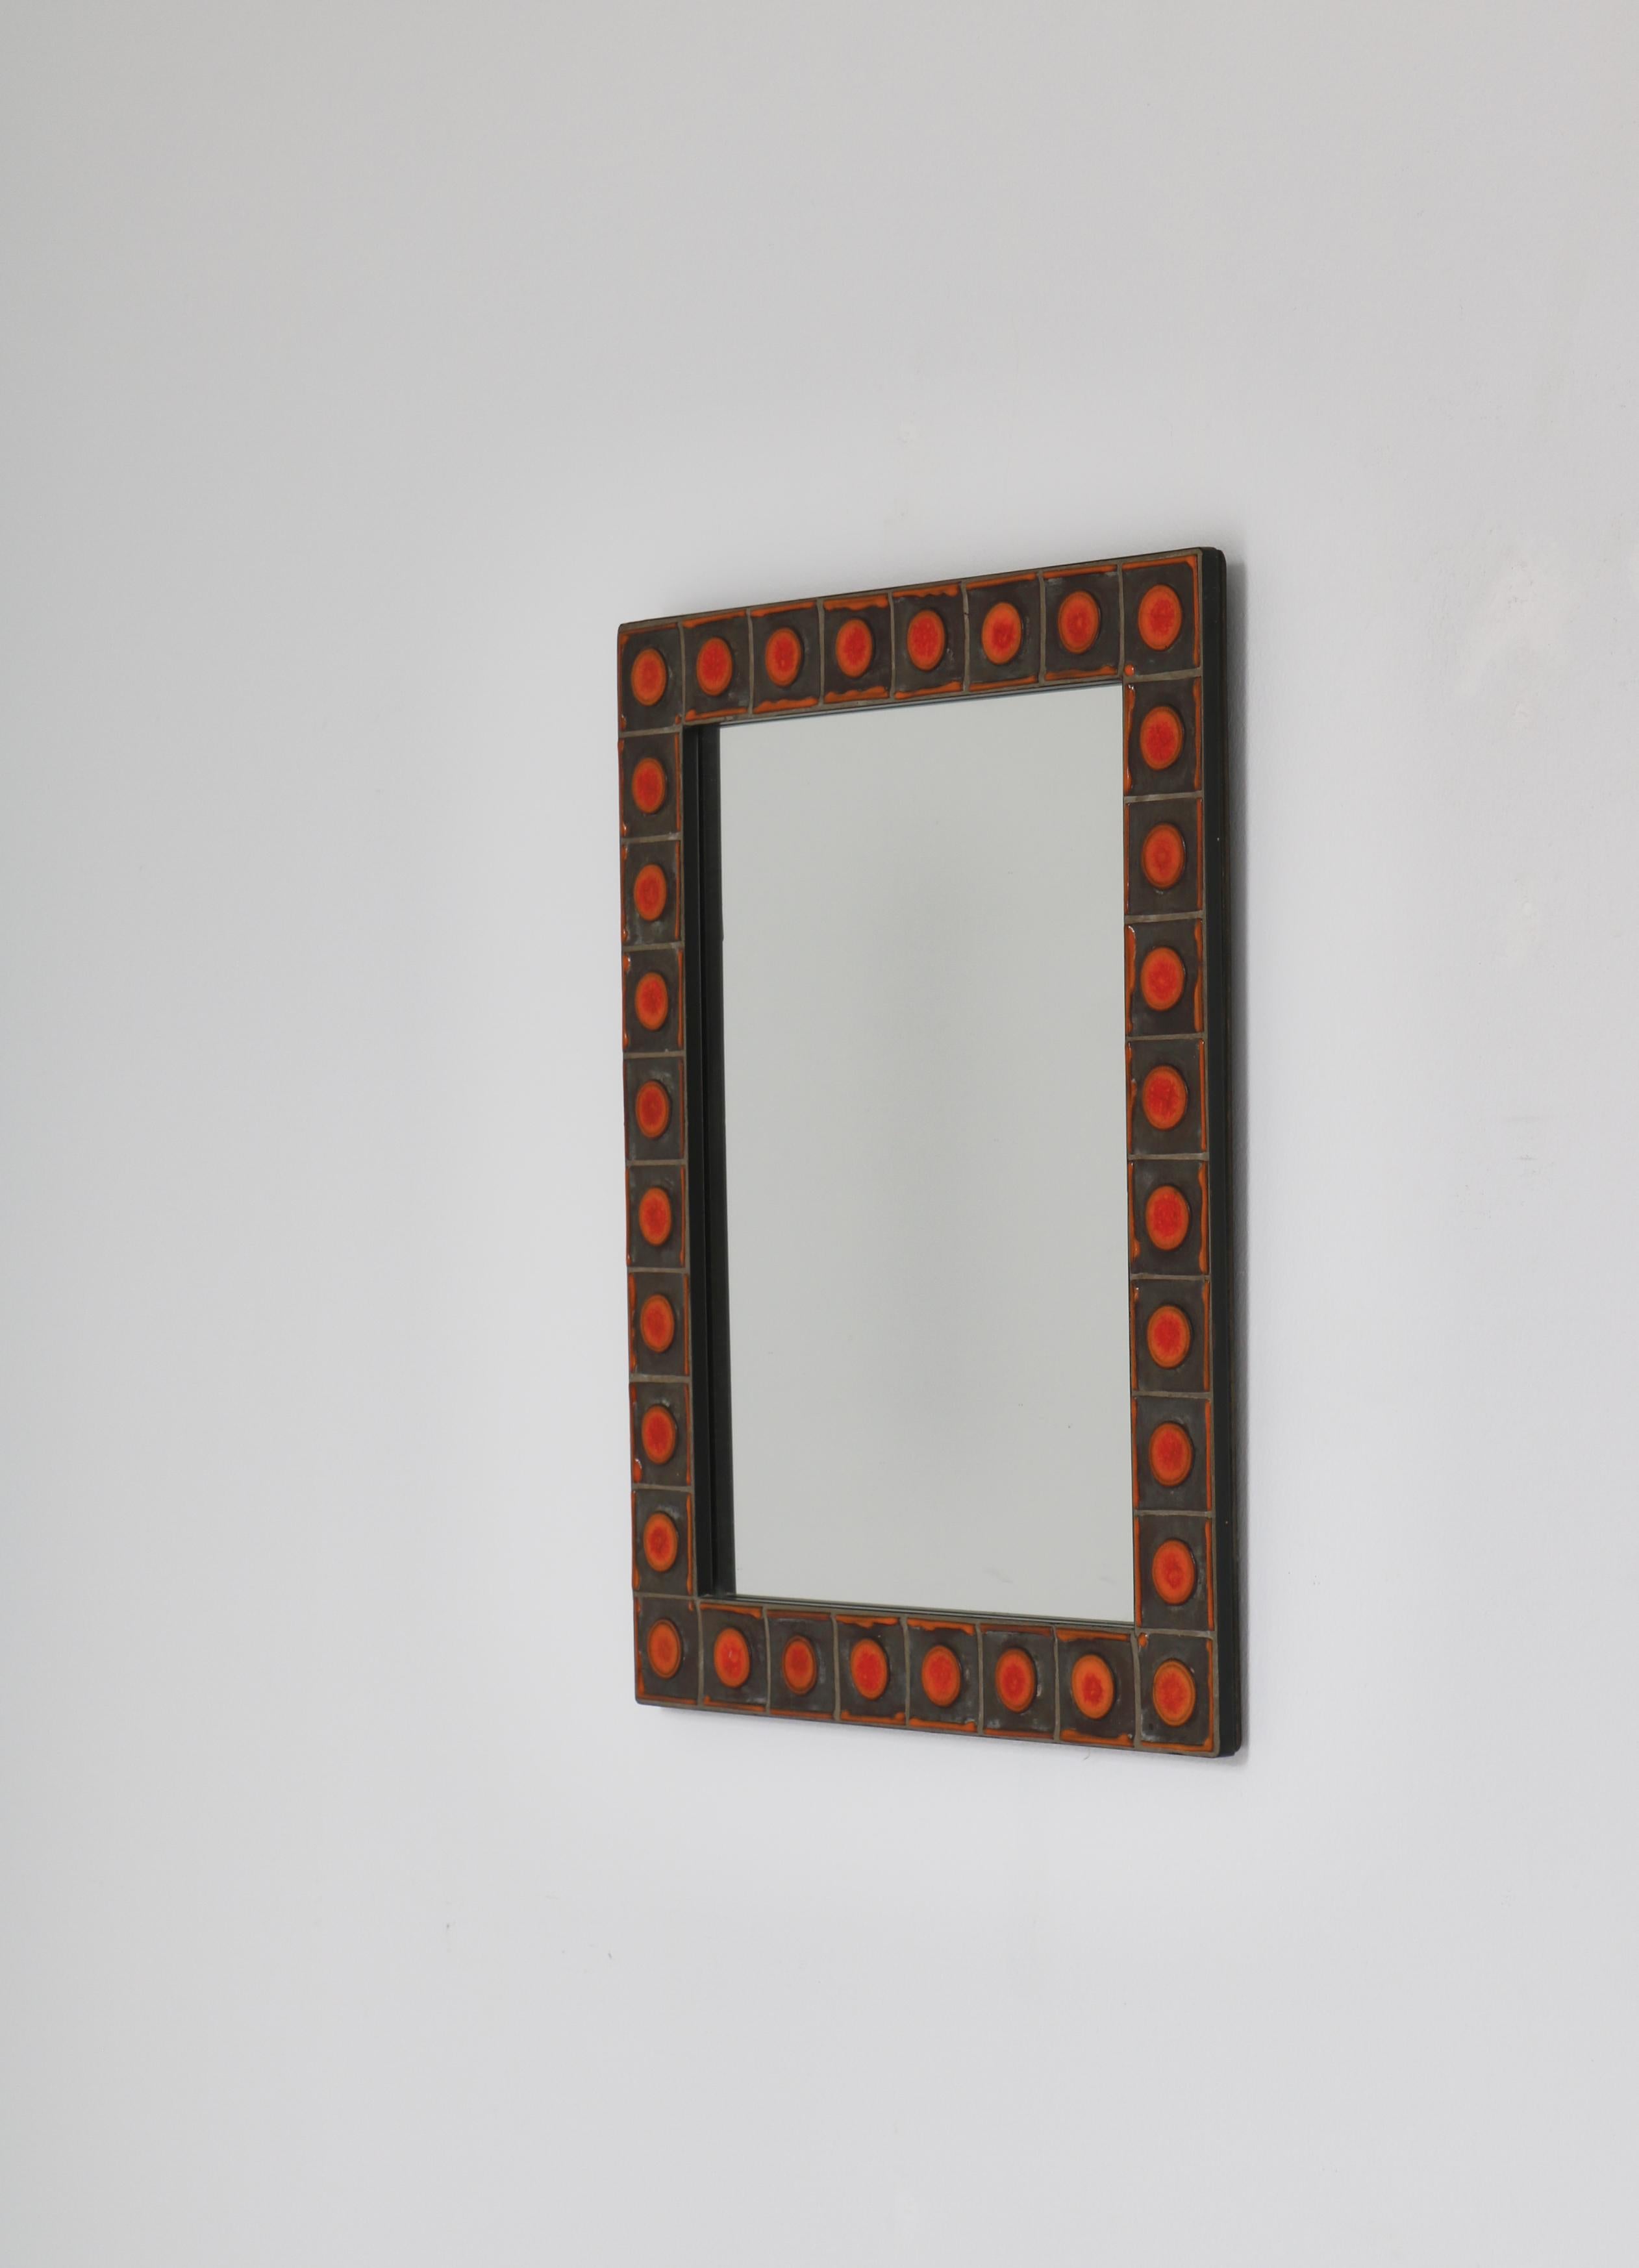 Beautiful wall mirror with orange decorated ceramics tiles  by Dietlinde Hein in the 1960s. The mirror was manufactured by Knabstrup ceramics workshop in Denmark.